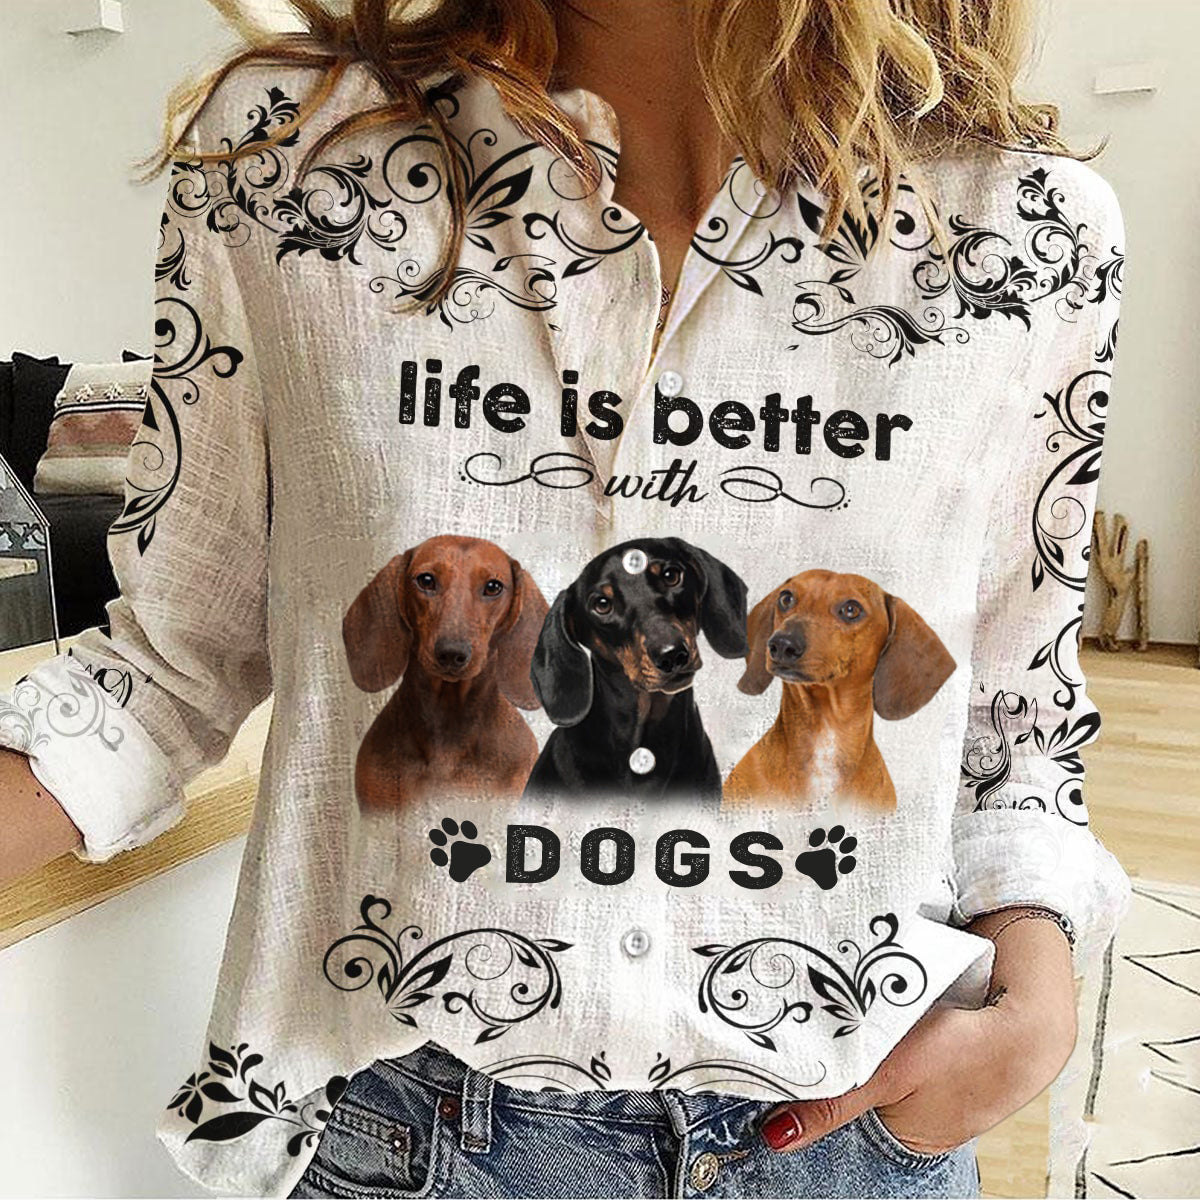 Dachshund02-Life Is Better With Dogs Women's Long-Sleeve Shirt